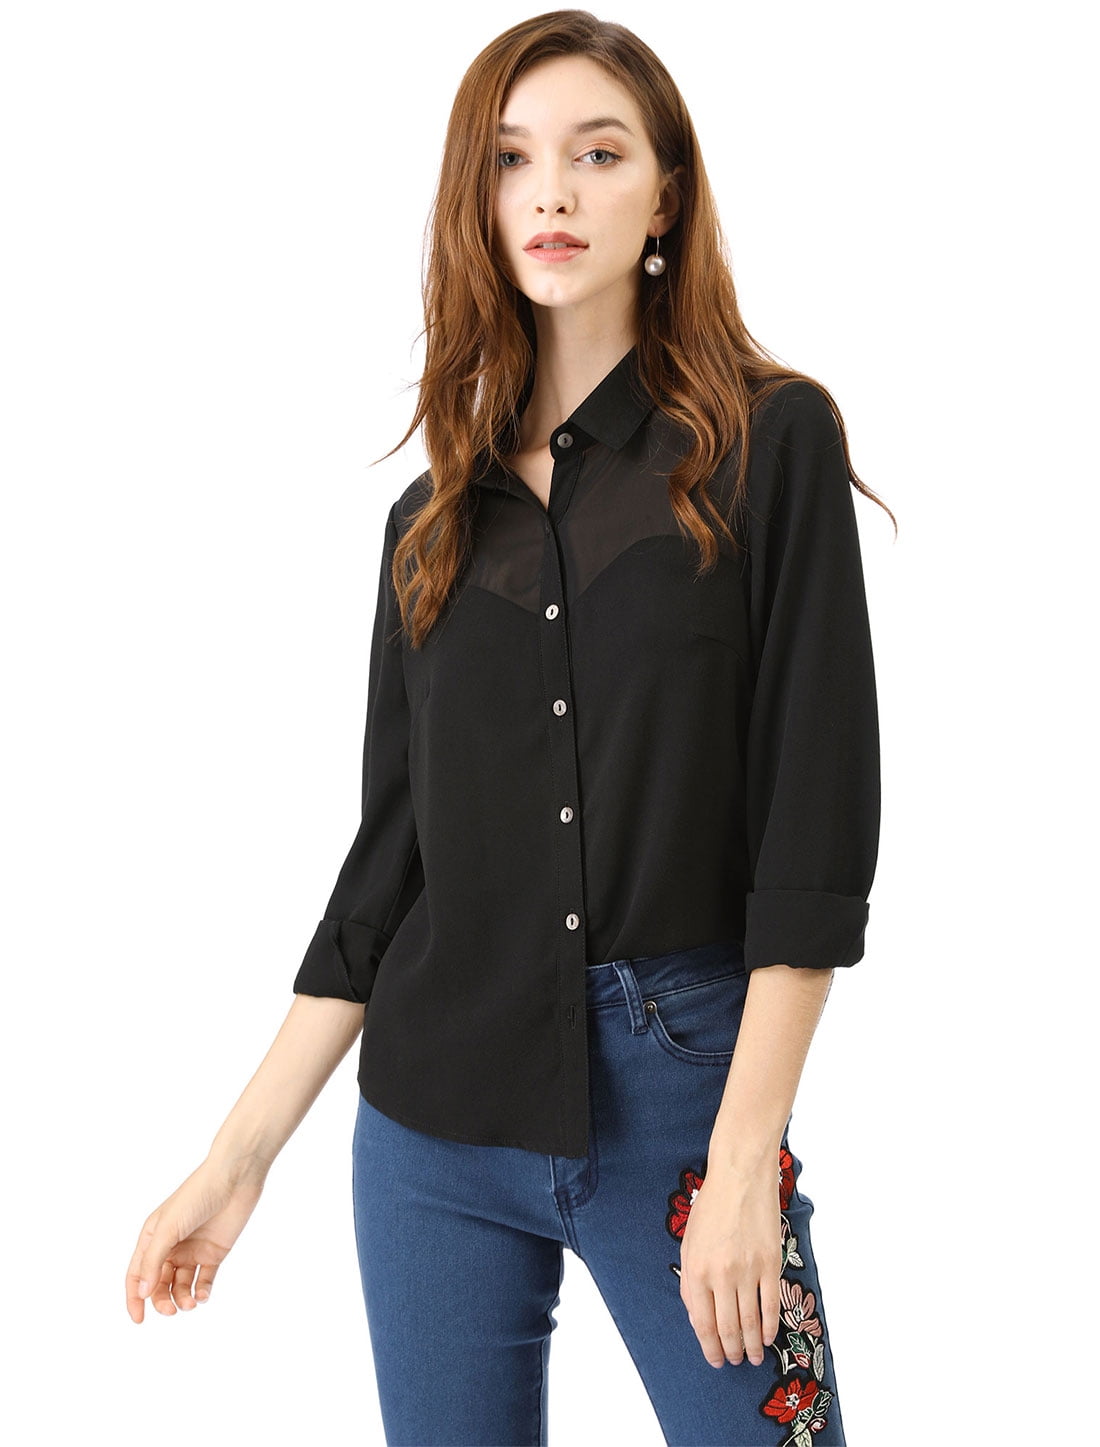 Black Sheer Long Sleeves Button Down Blouse